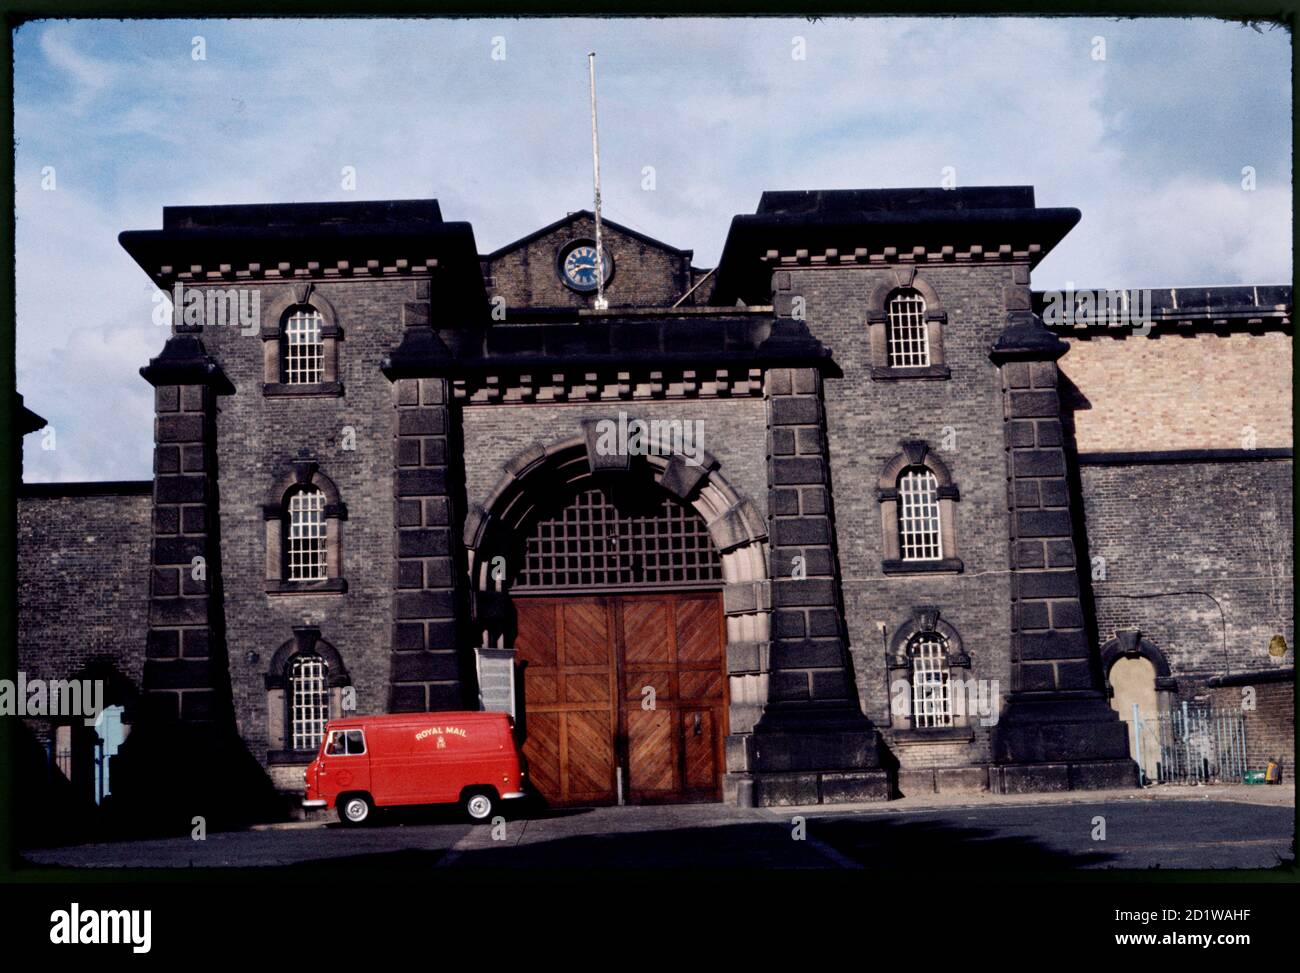 Wandsworth Prison, Heathfield Avenue, Wandsworth Common, Wandsworth, Greater London Authority. The entrance gatehouse to HMP Wandsworth with a Royal Mail van parked outside. Stock Photo